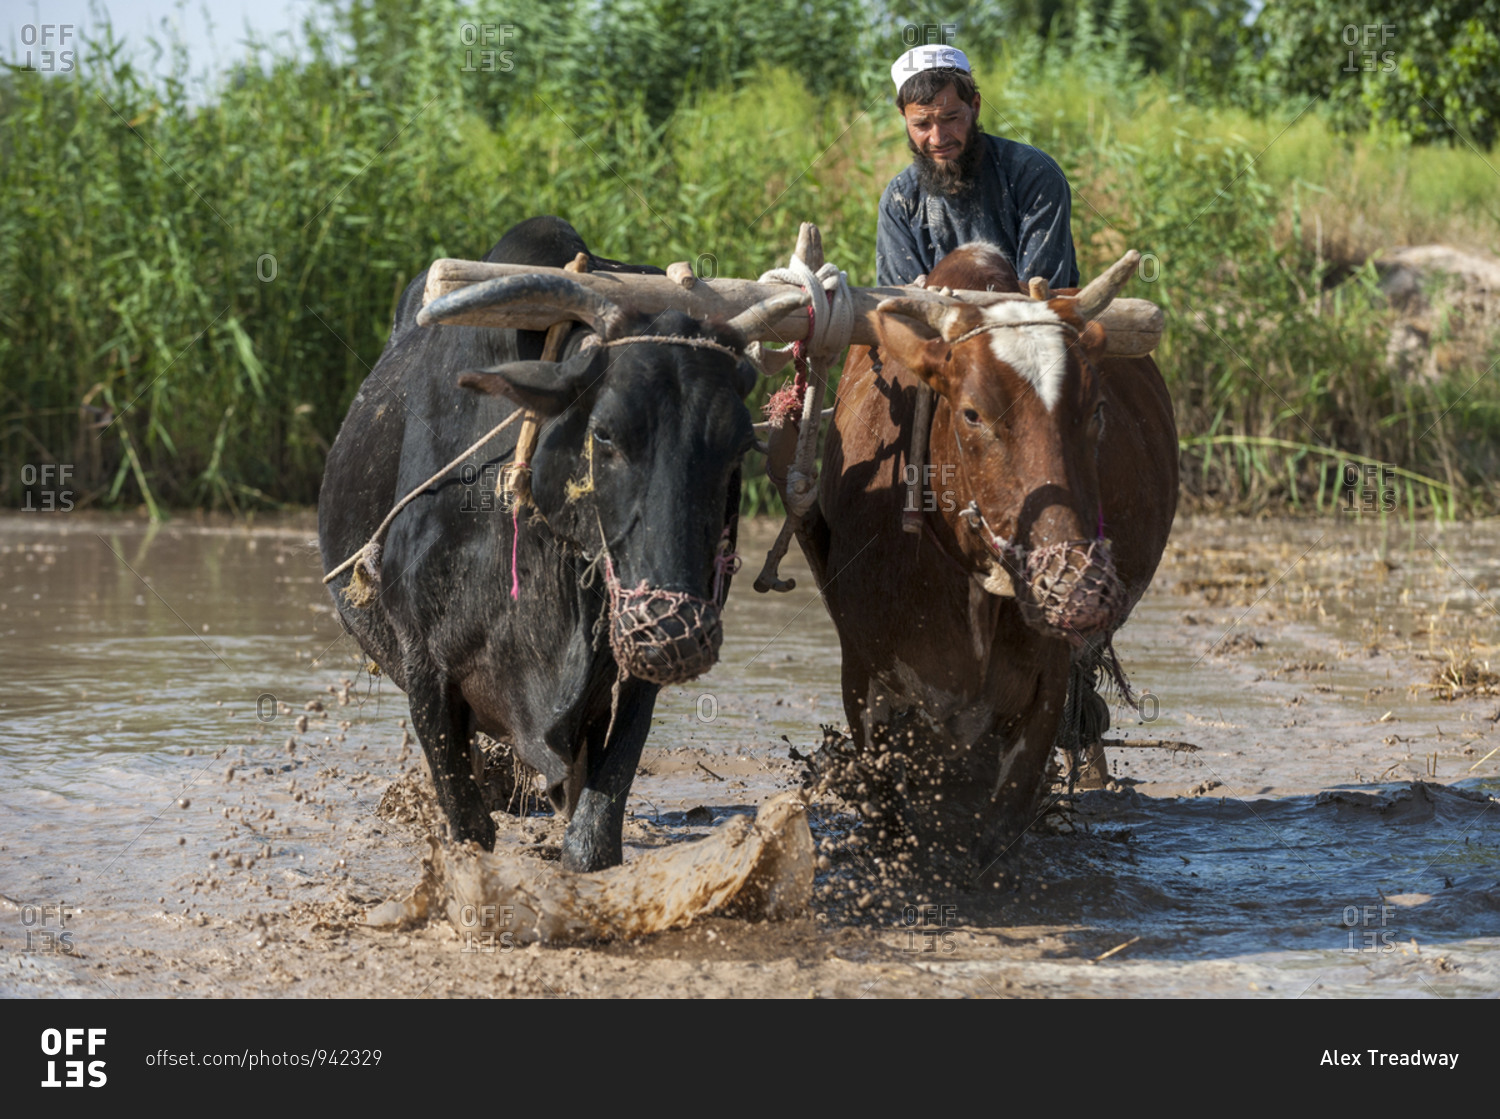 A farmer from Herat province works with cows in his rice paddies